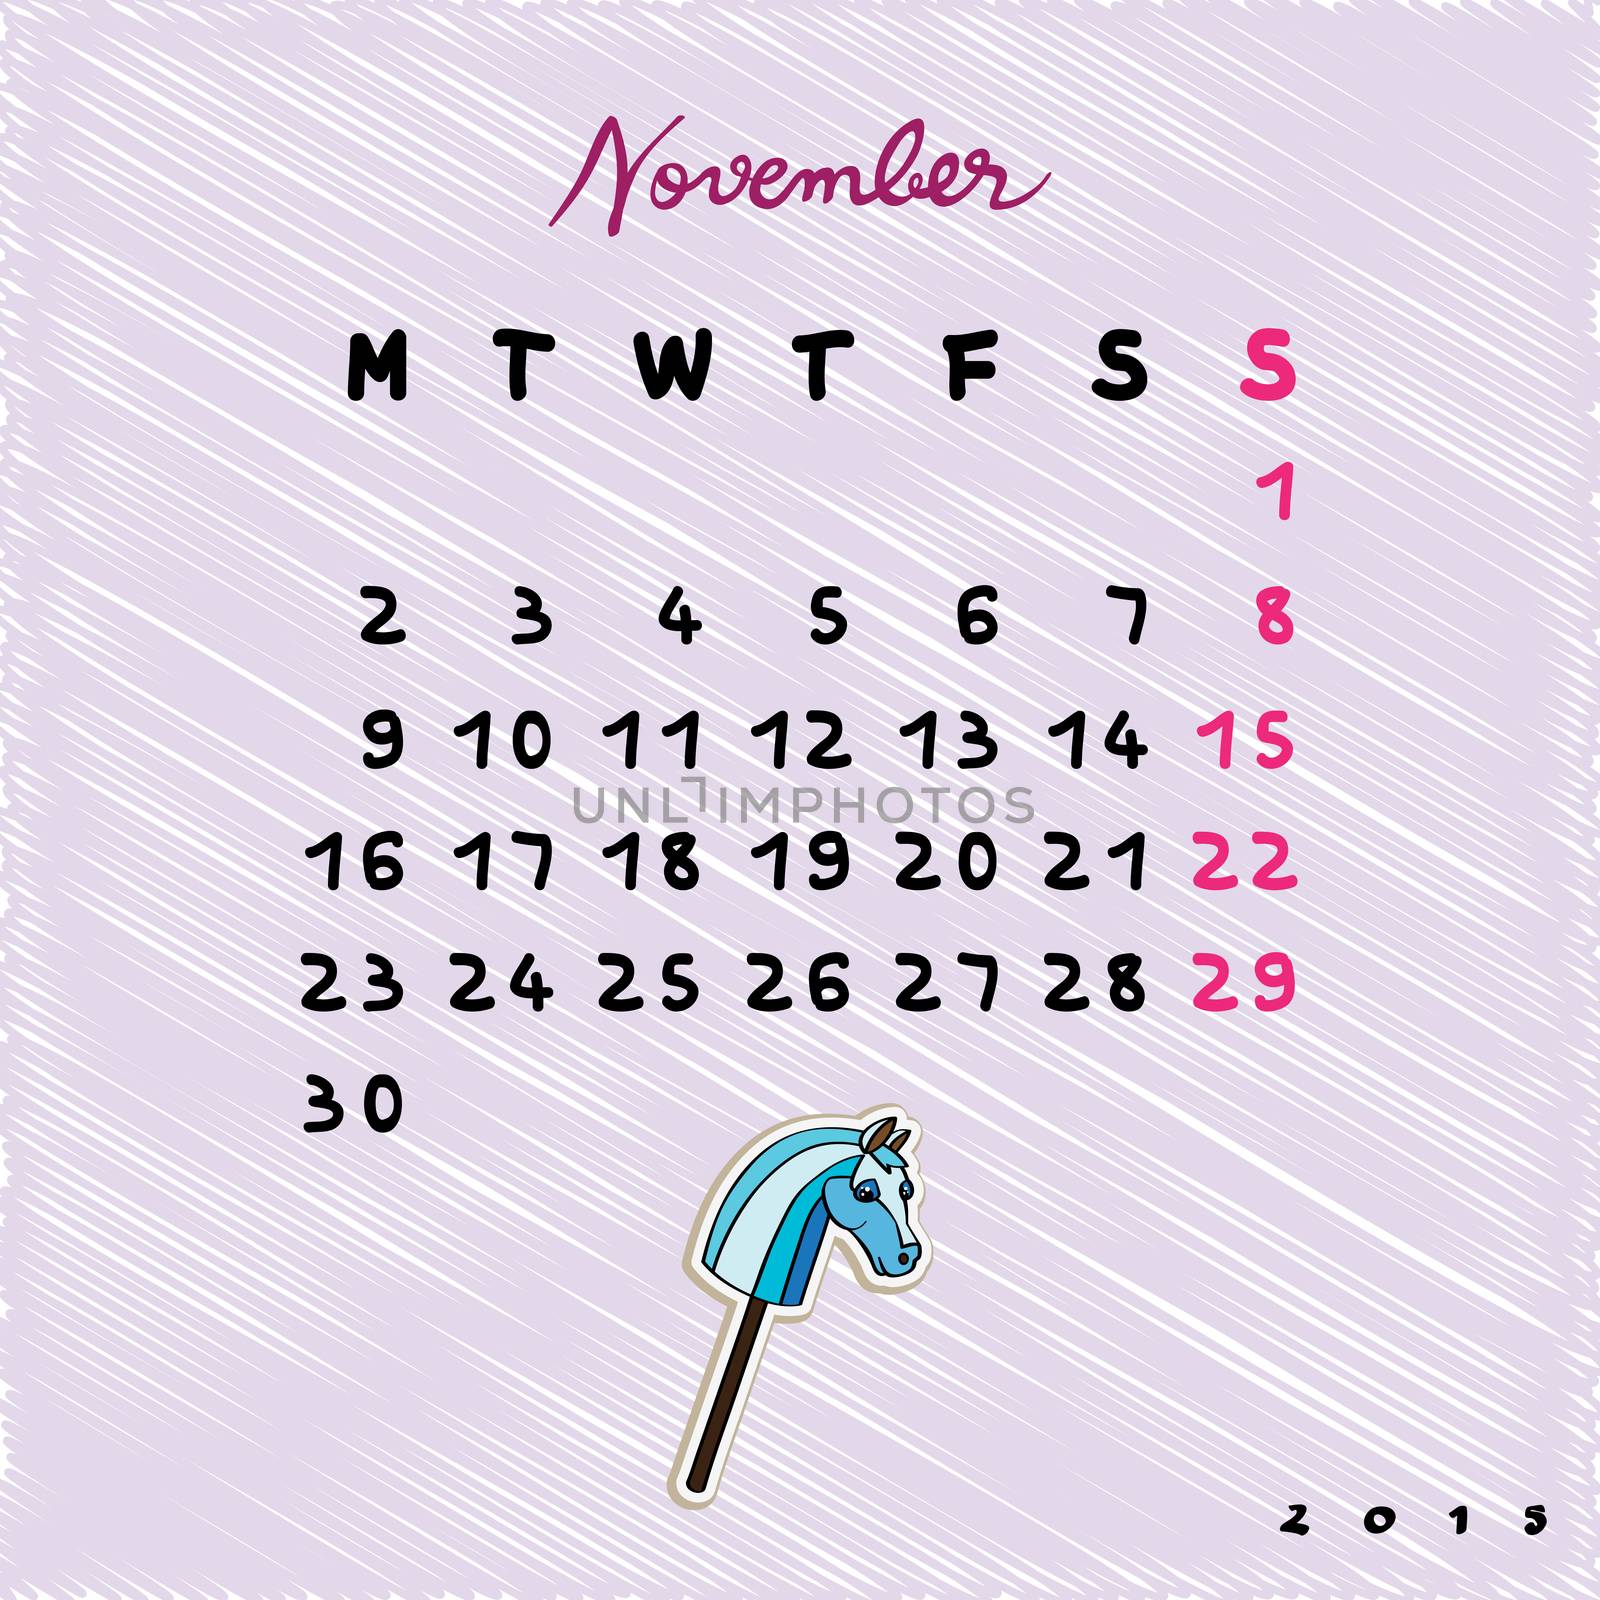 Calendar 2015 with toy horse, graphic illustration of November month calendar with original hand drawn text